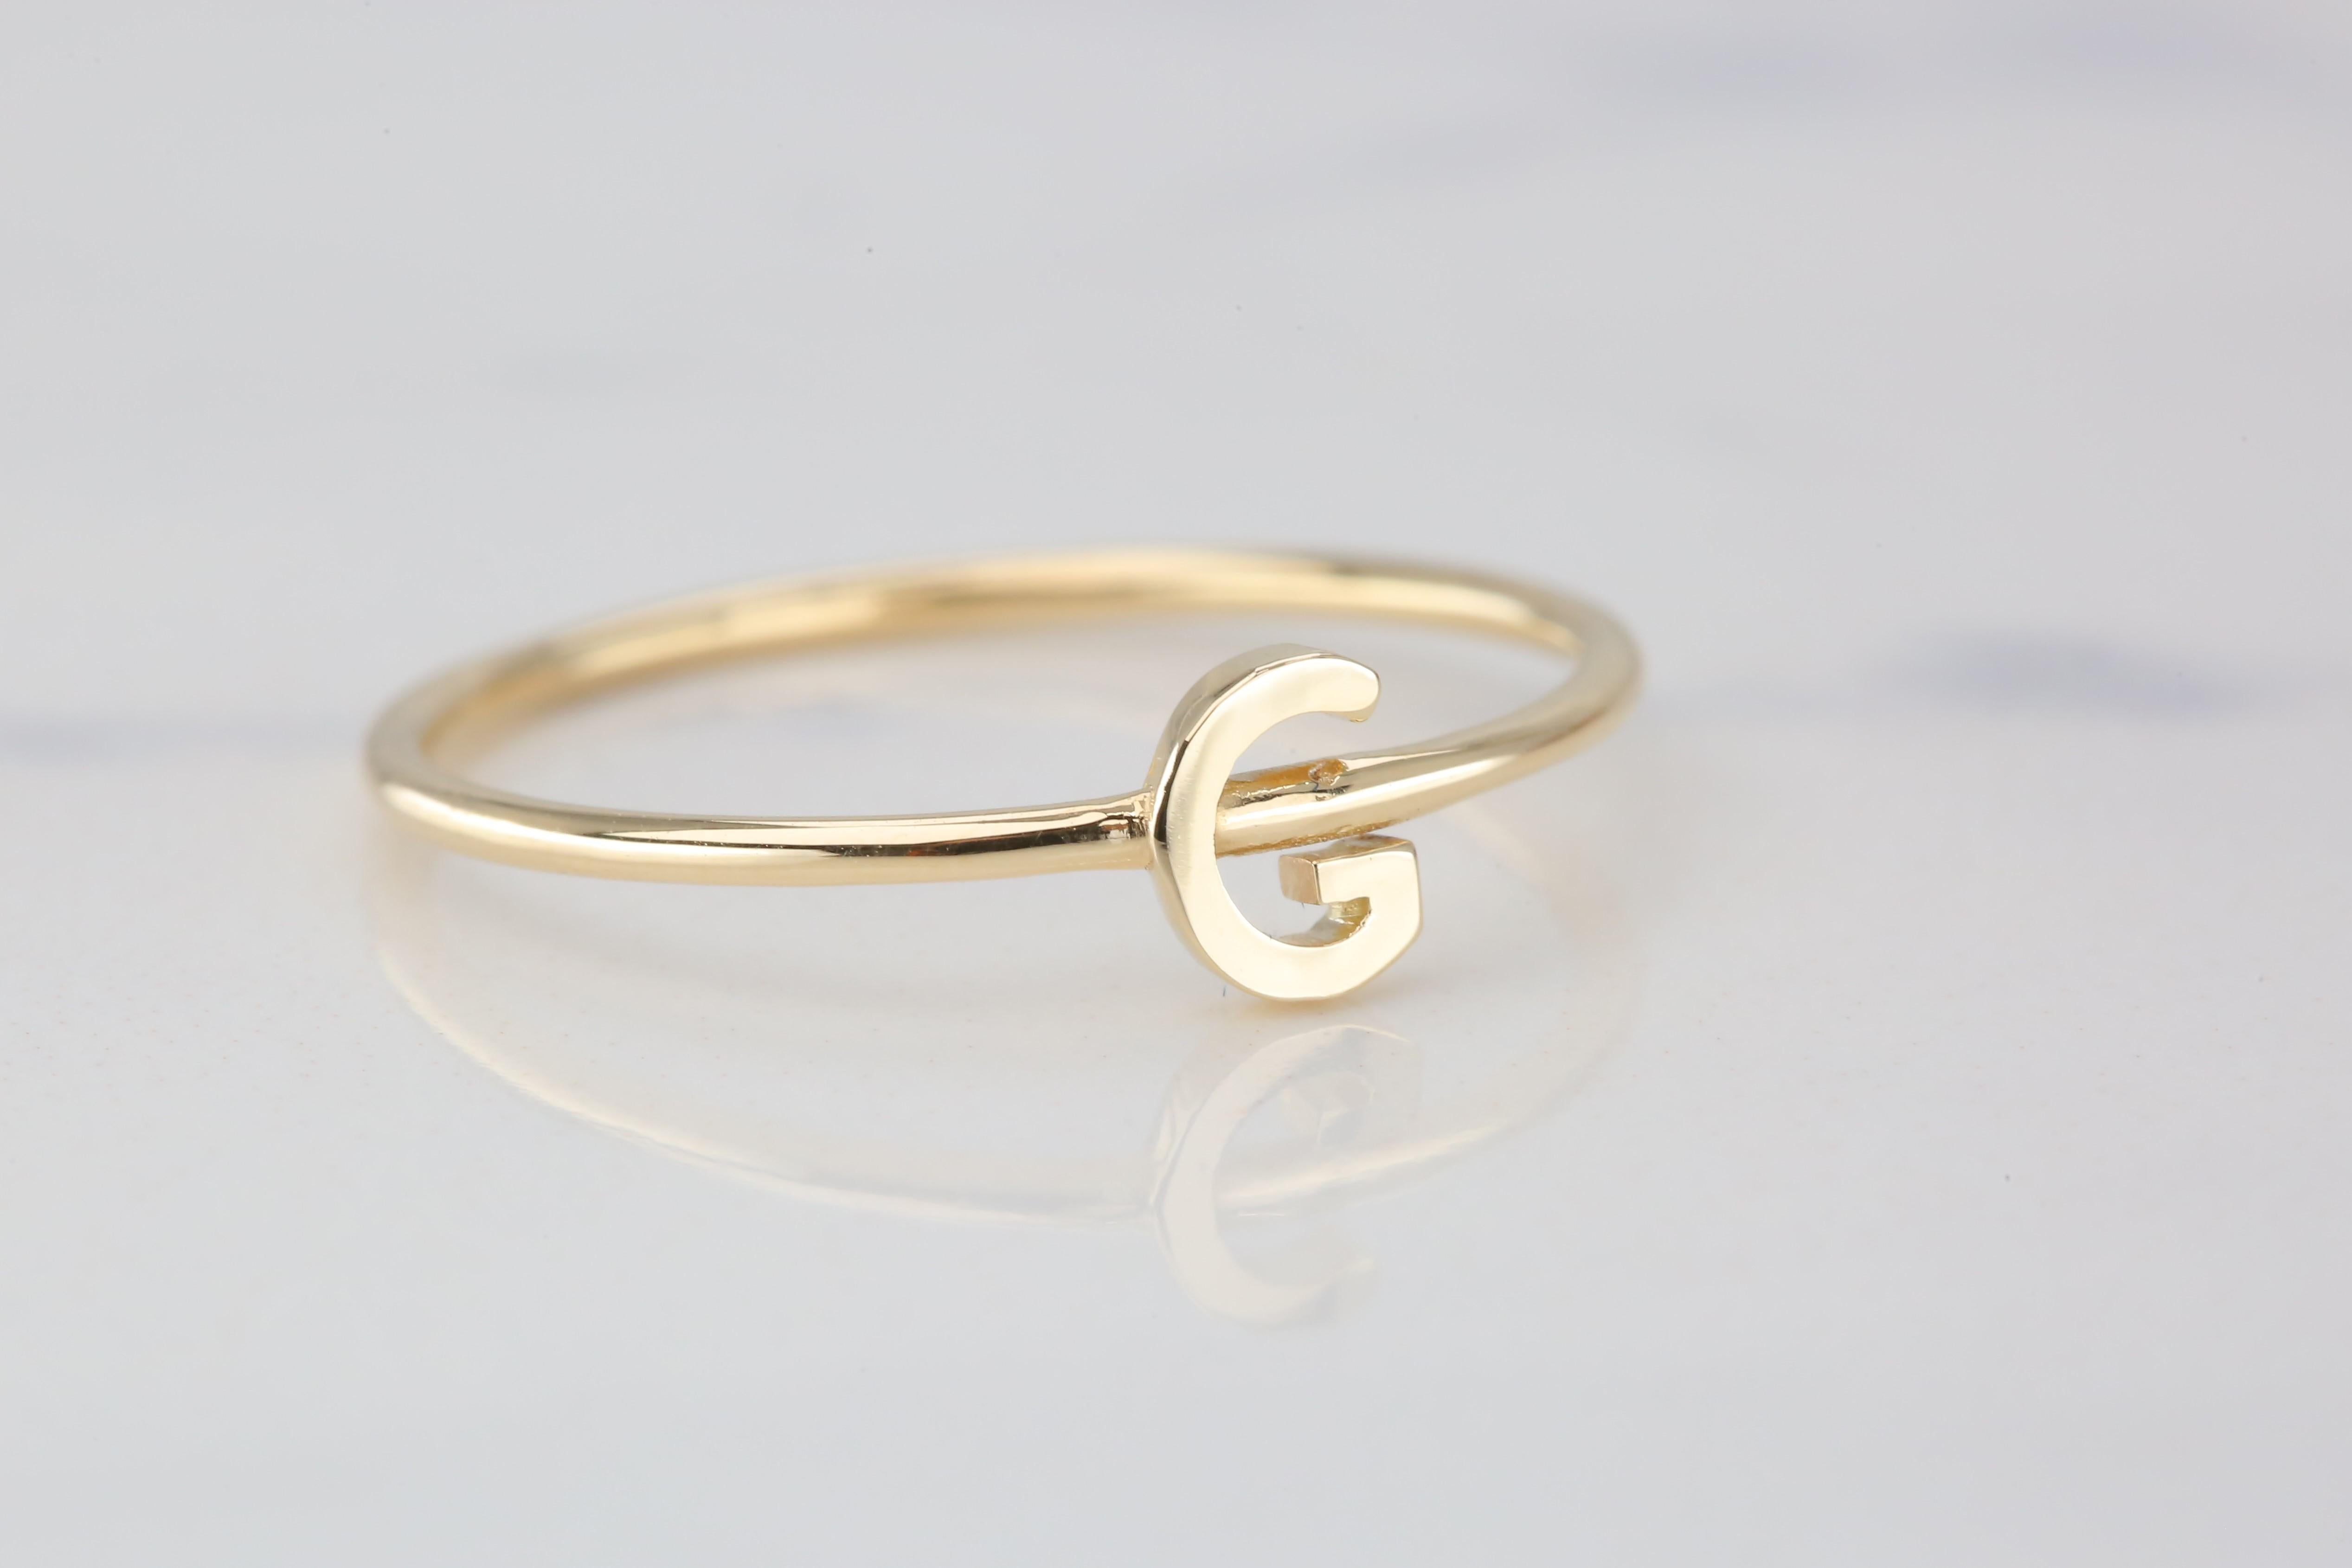 For Sale:  14K Gold Initial G Letter Ring, Personalized Initial Letter Ring 4